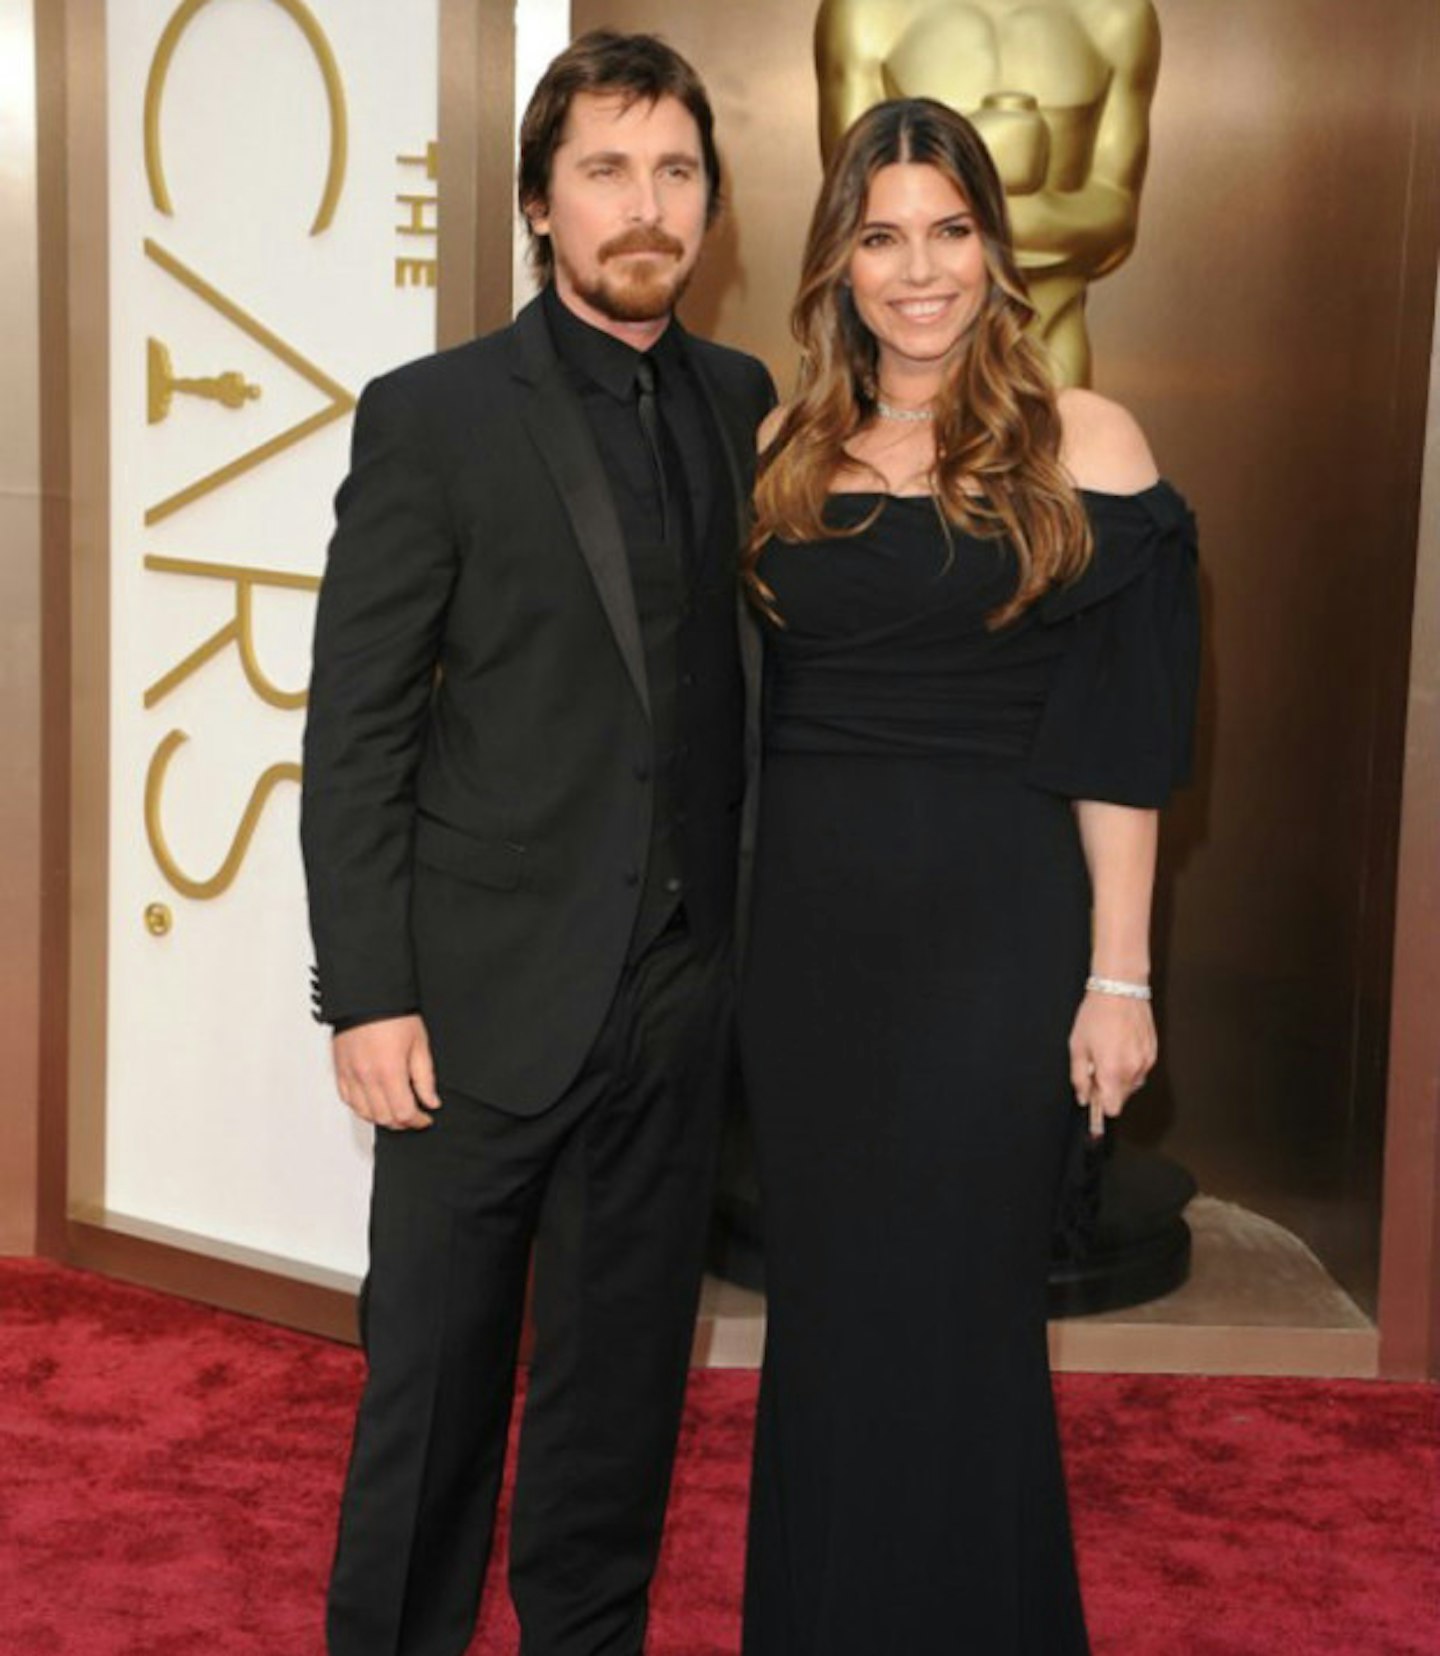 August 2014: Christian Bale welcomed a son